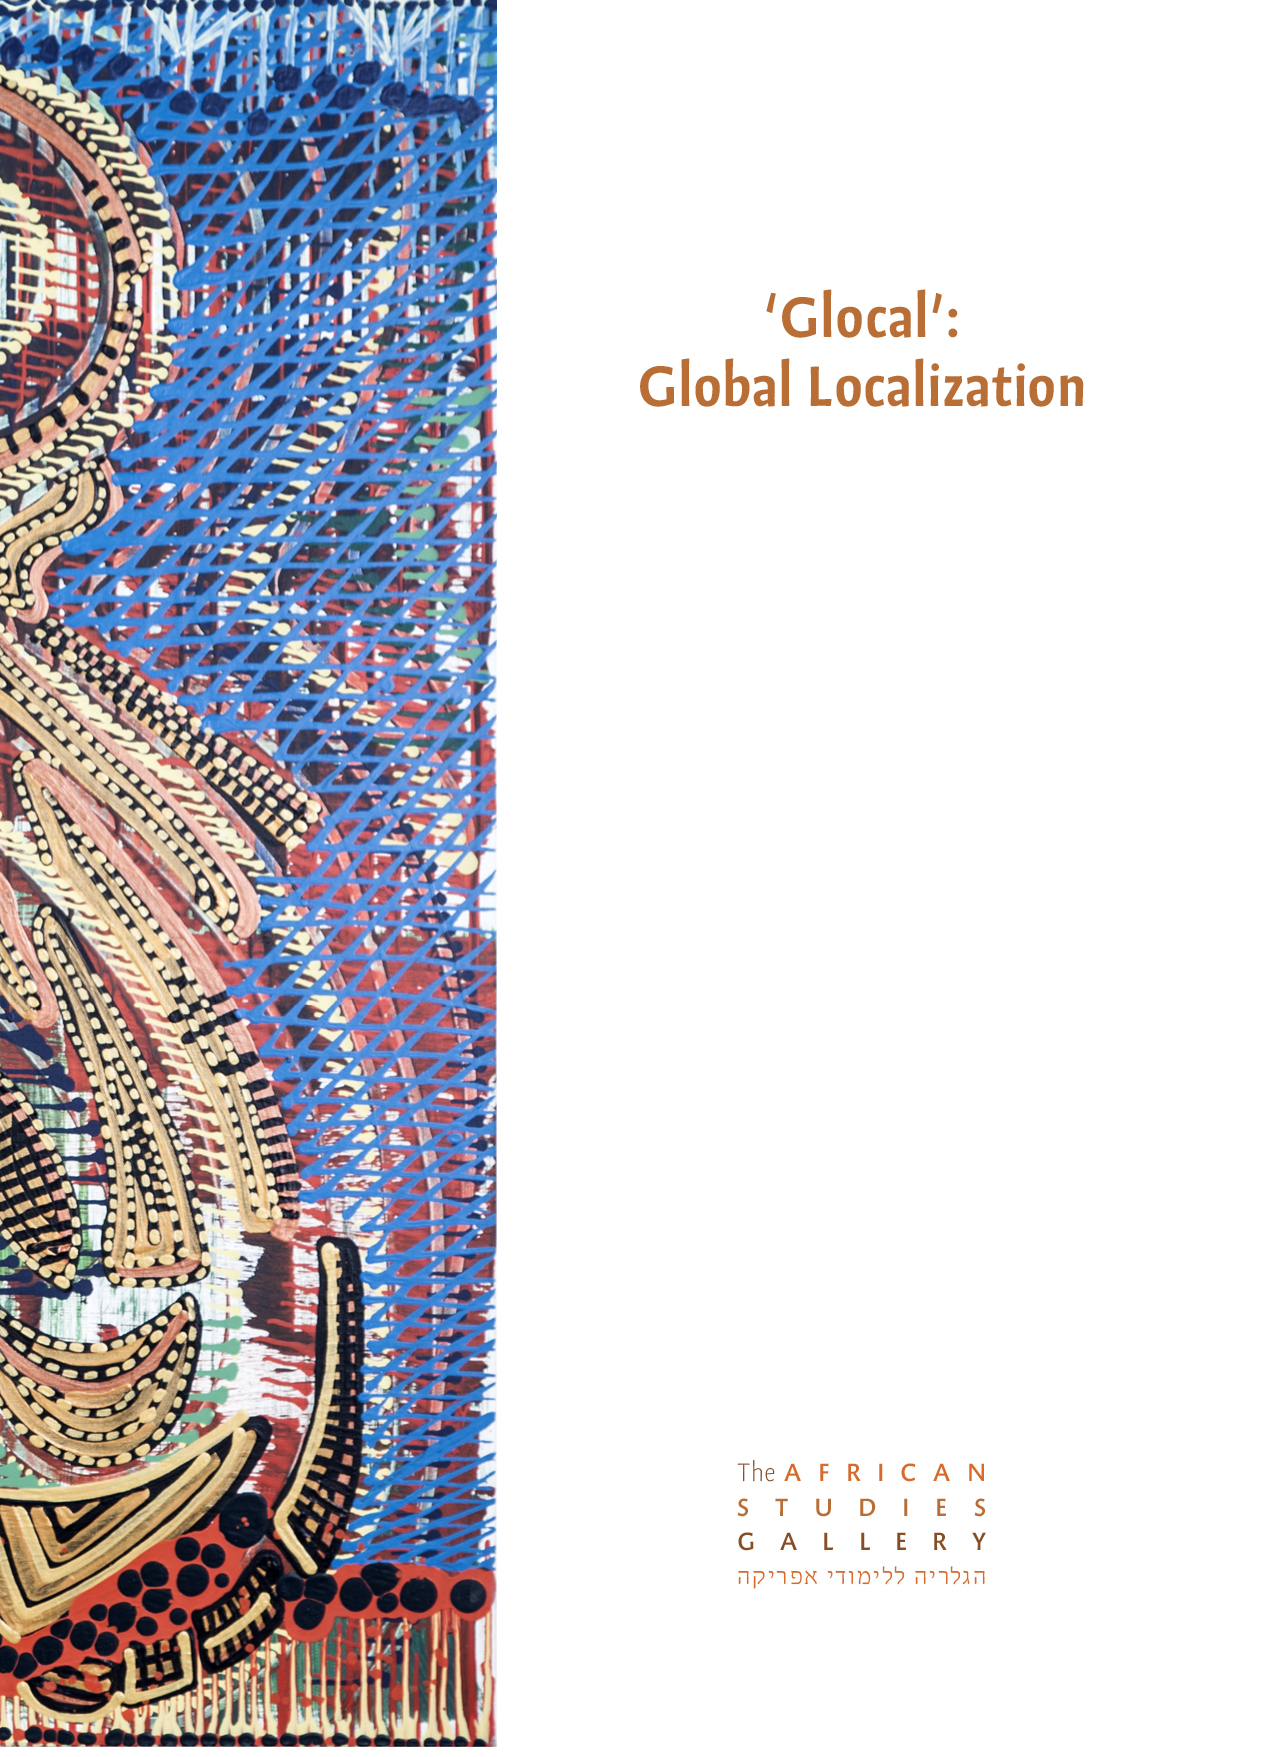 https://www.africanstudiesgallery.org/catalogues/glocal.pdf